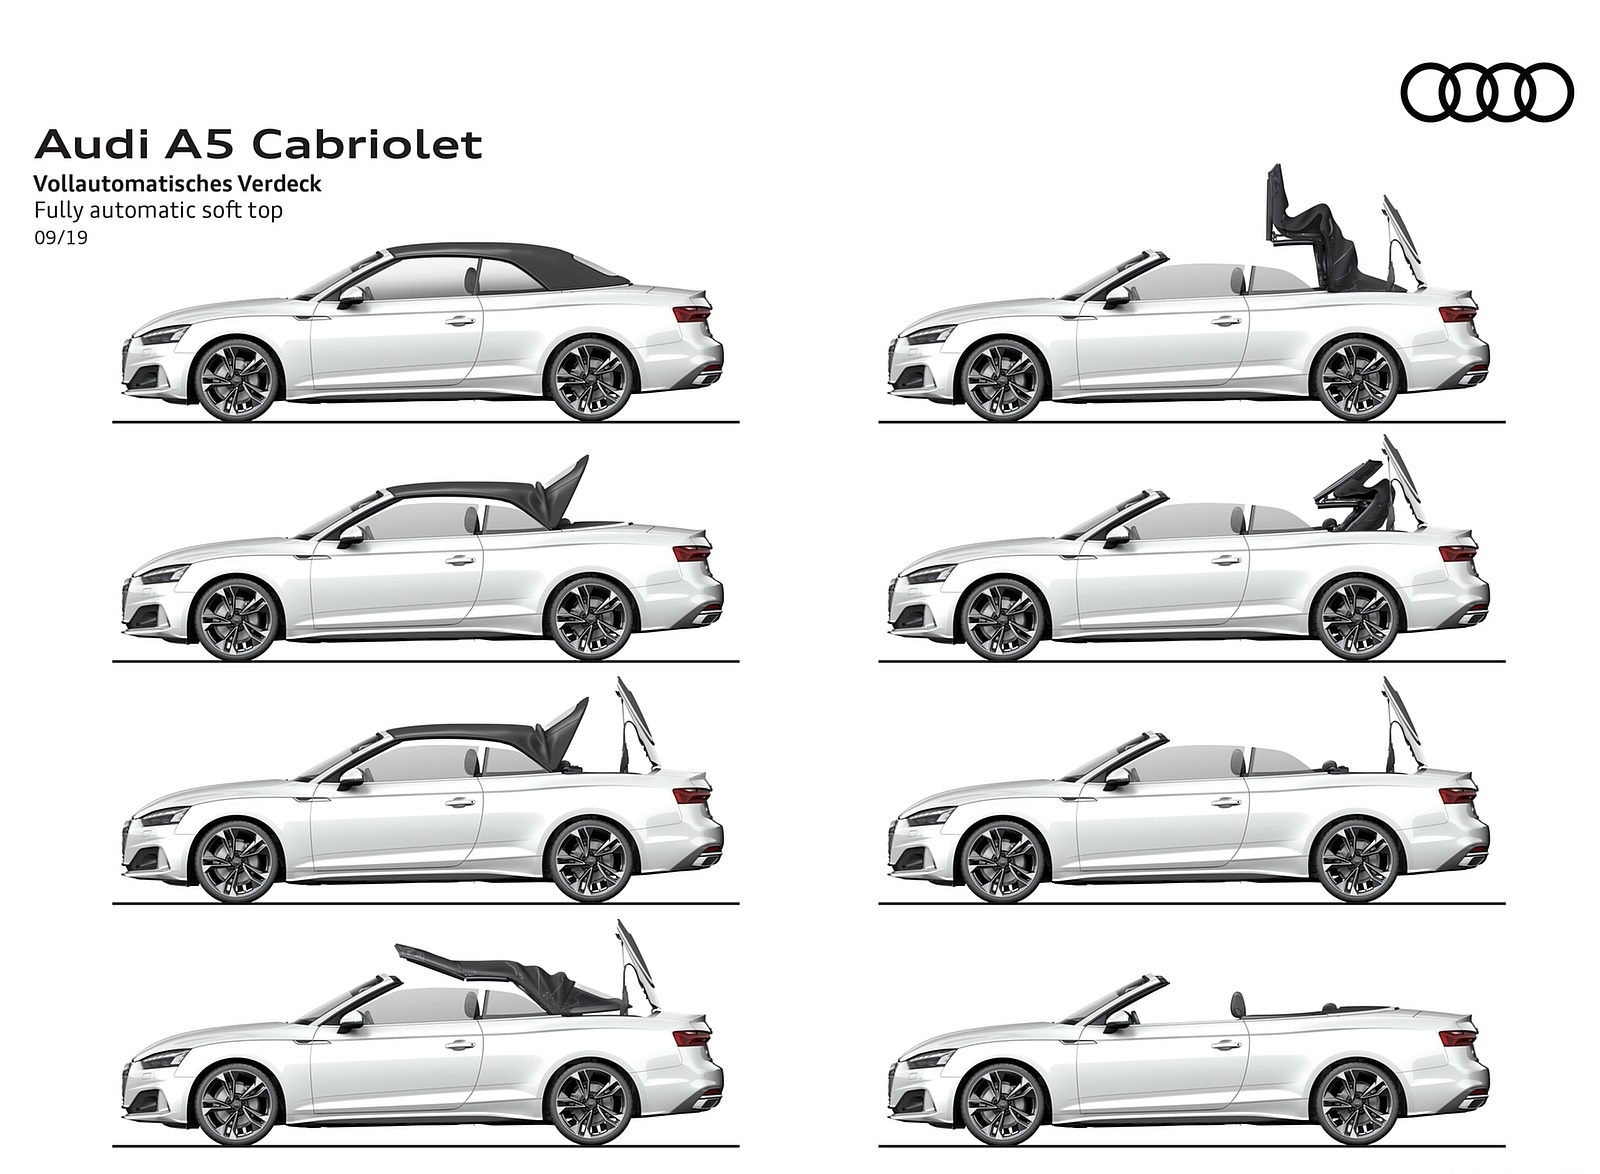 2020 Audi A5 Cabriolet Fully automatic soft top Wallpapers #23 of 29